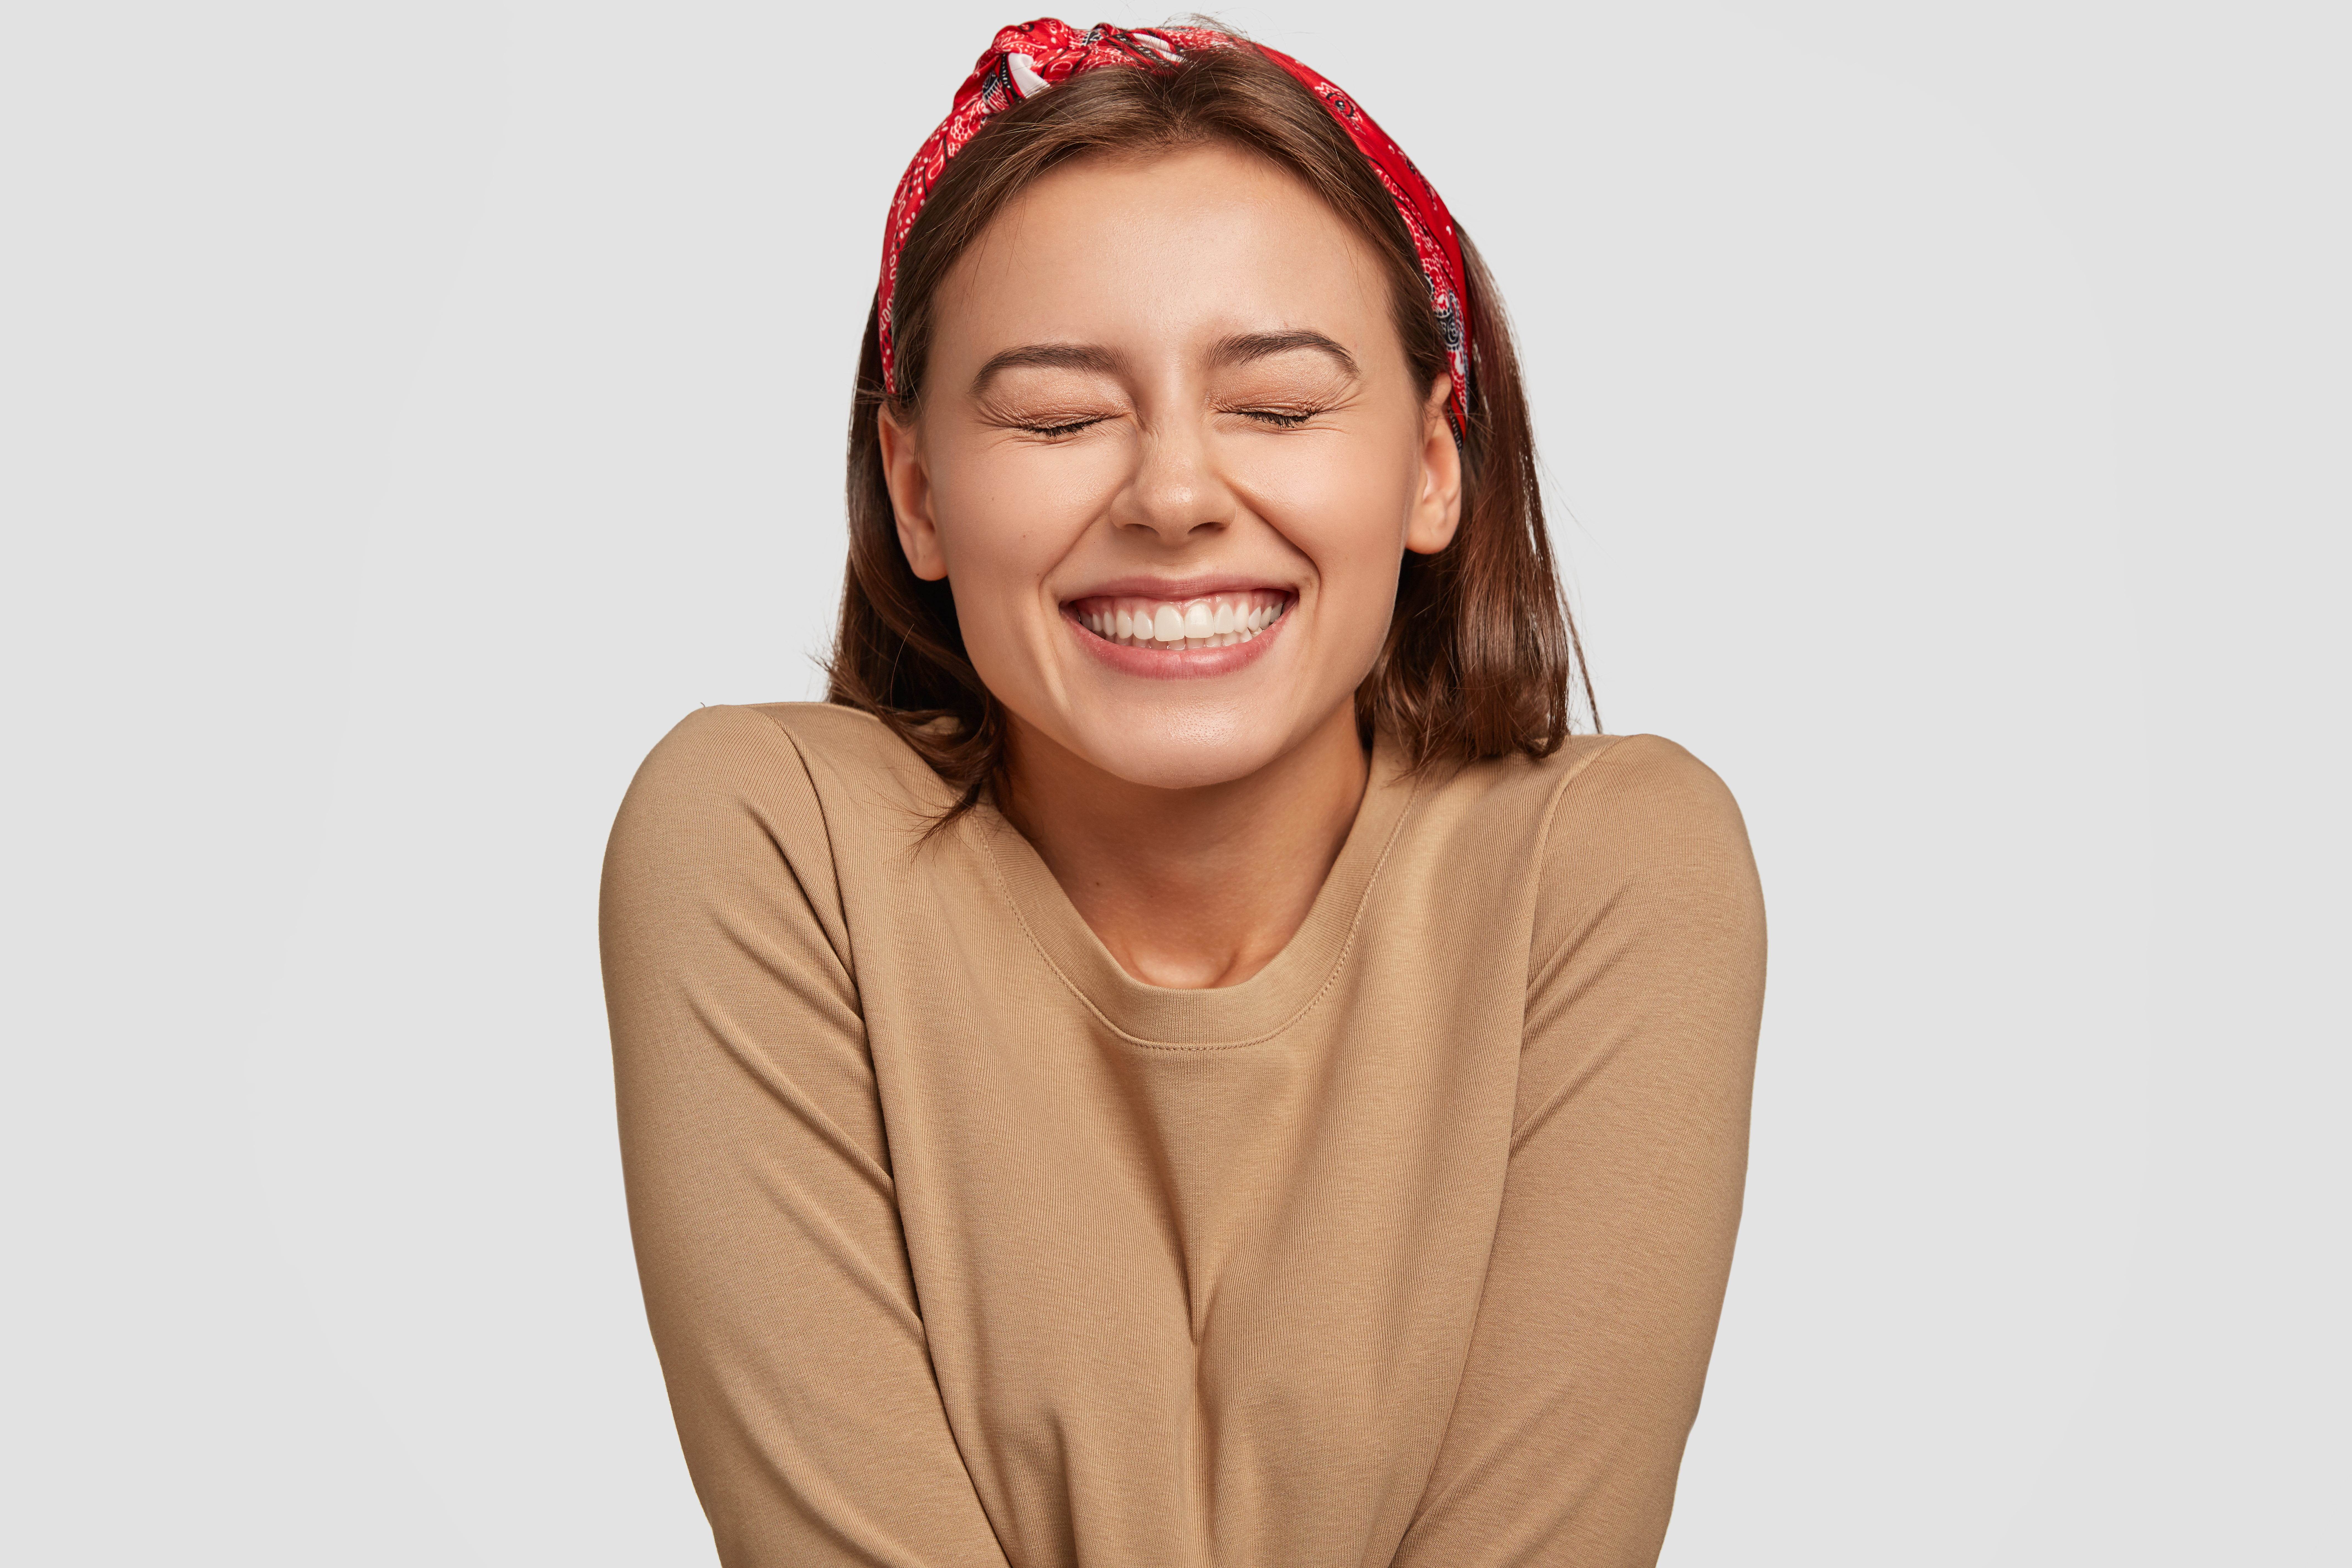 Portrait of happy European woman has broad smile, closes eyes, feels excitement, being in high spirit, recieves proposal from boyfriend, laughs at something funny, models against white background